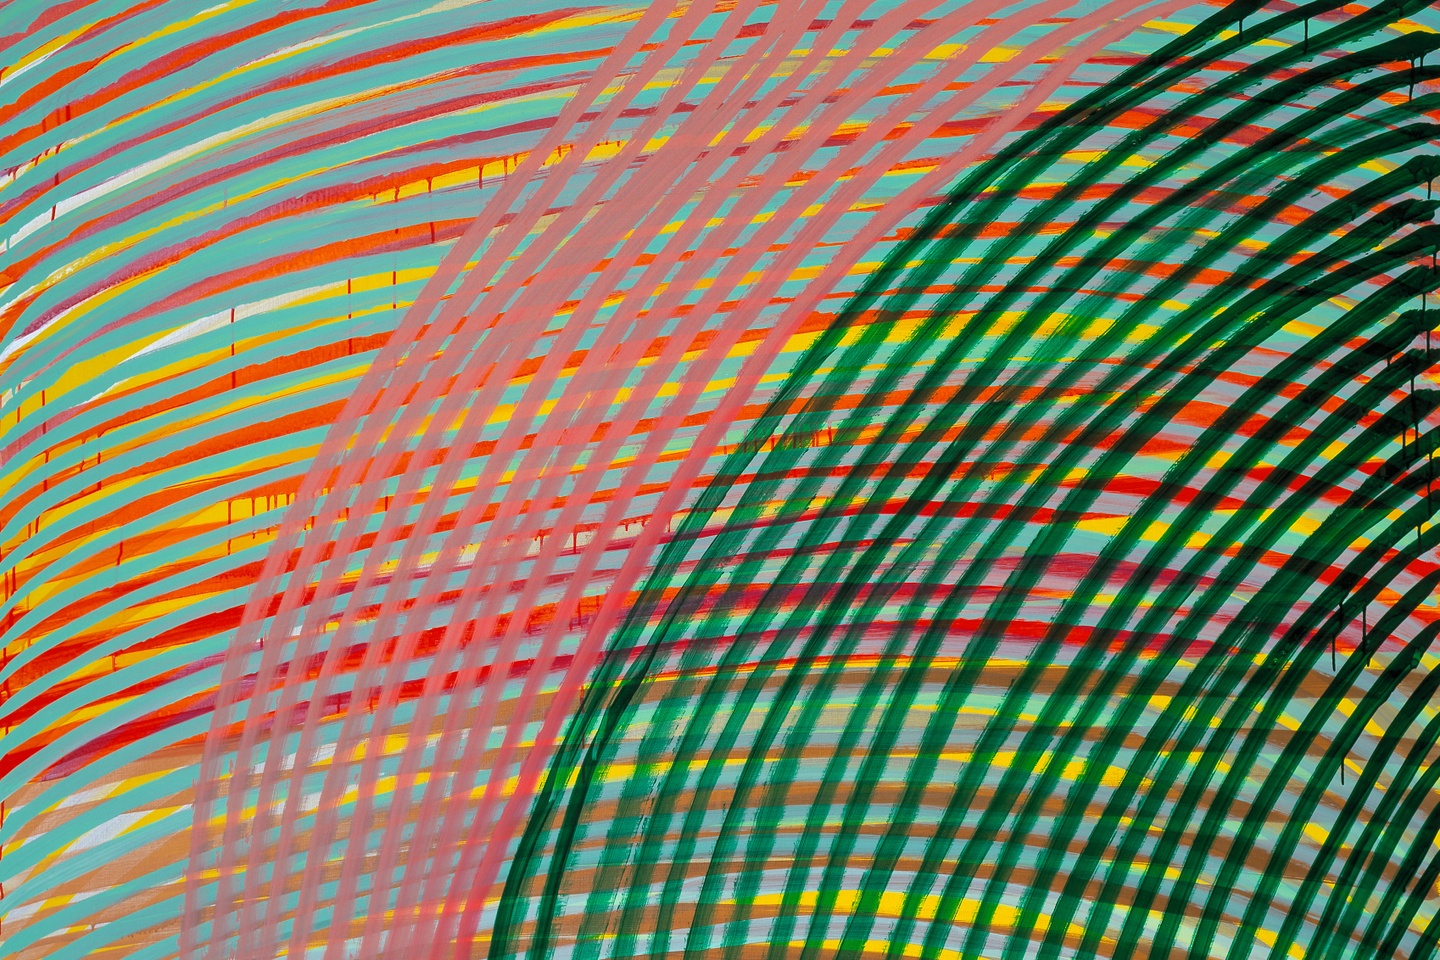 An abstract painting consisting of flowing, overlapping lines in bright pink, red, yellow, light blue, and green